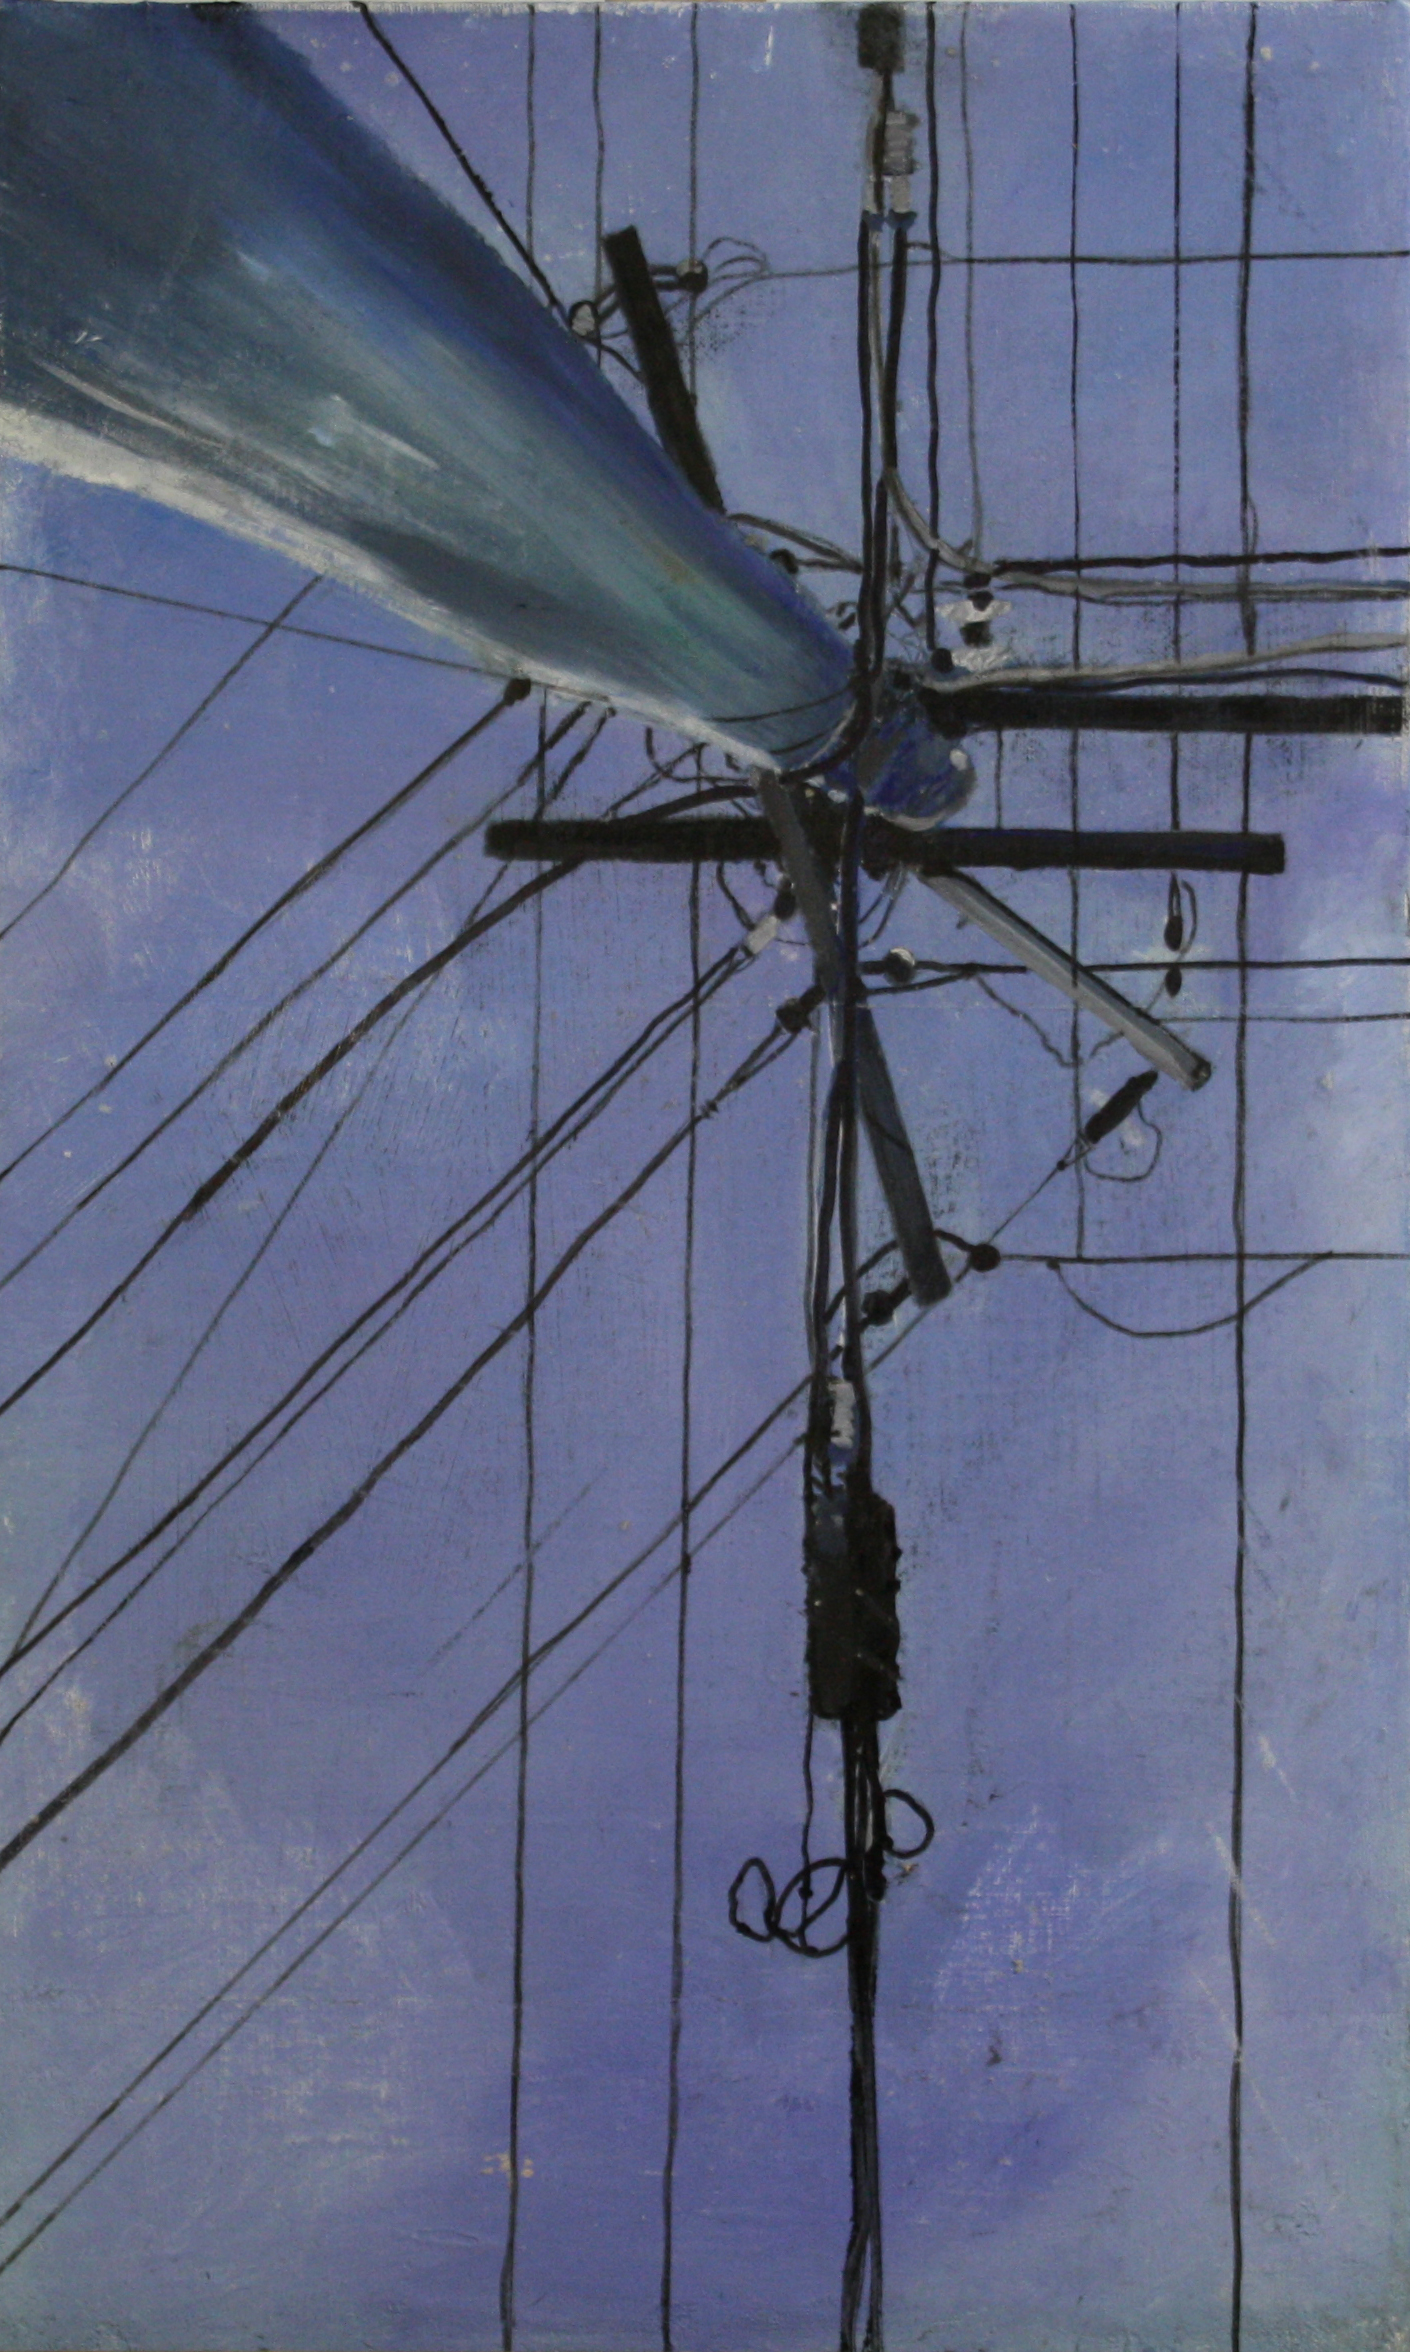  Looking Up:  41872   2011, oil on canvas on hardboard  50 x 76 cm  private collection       